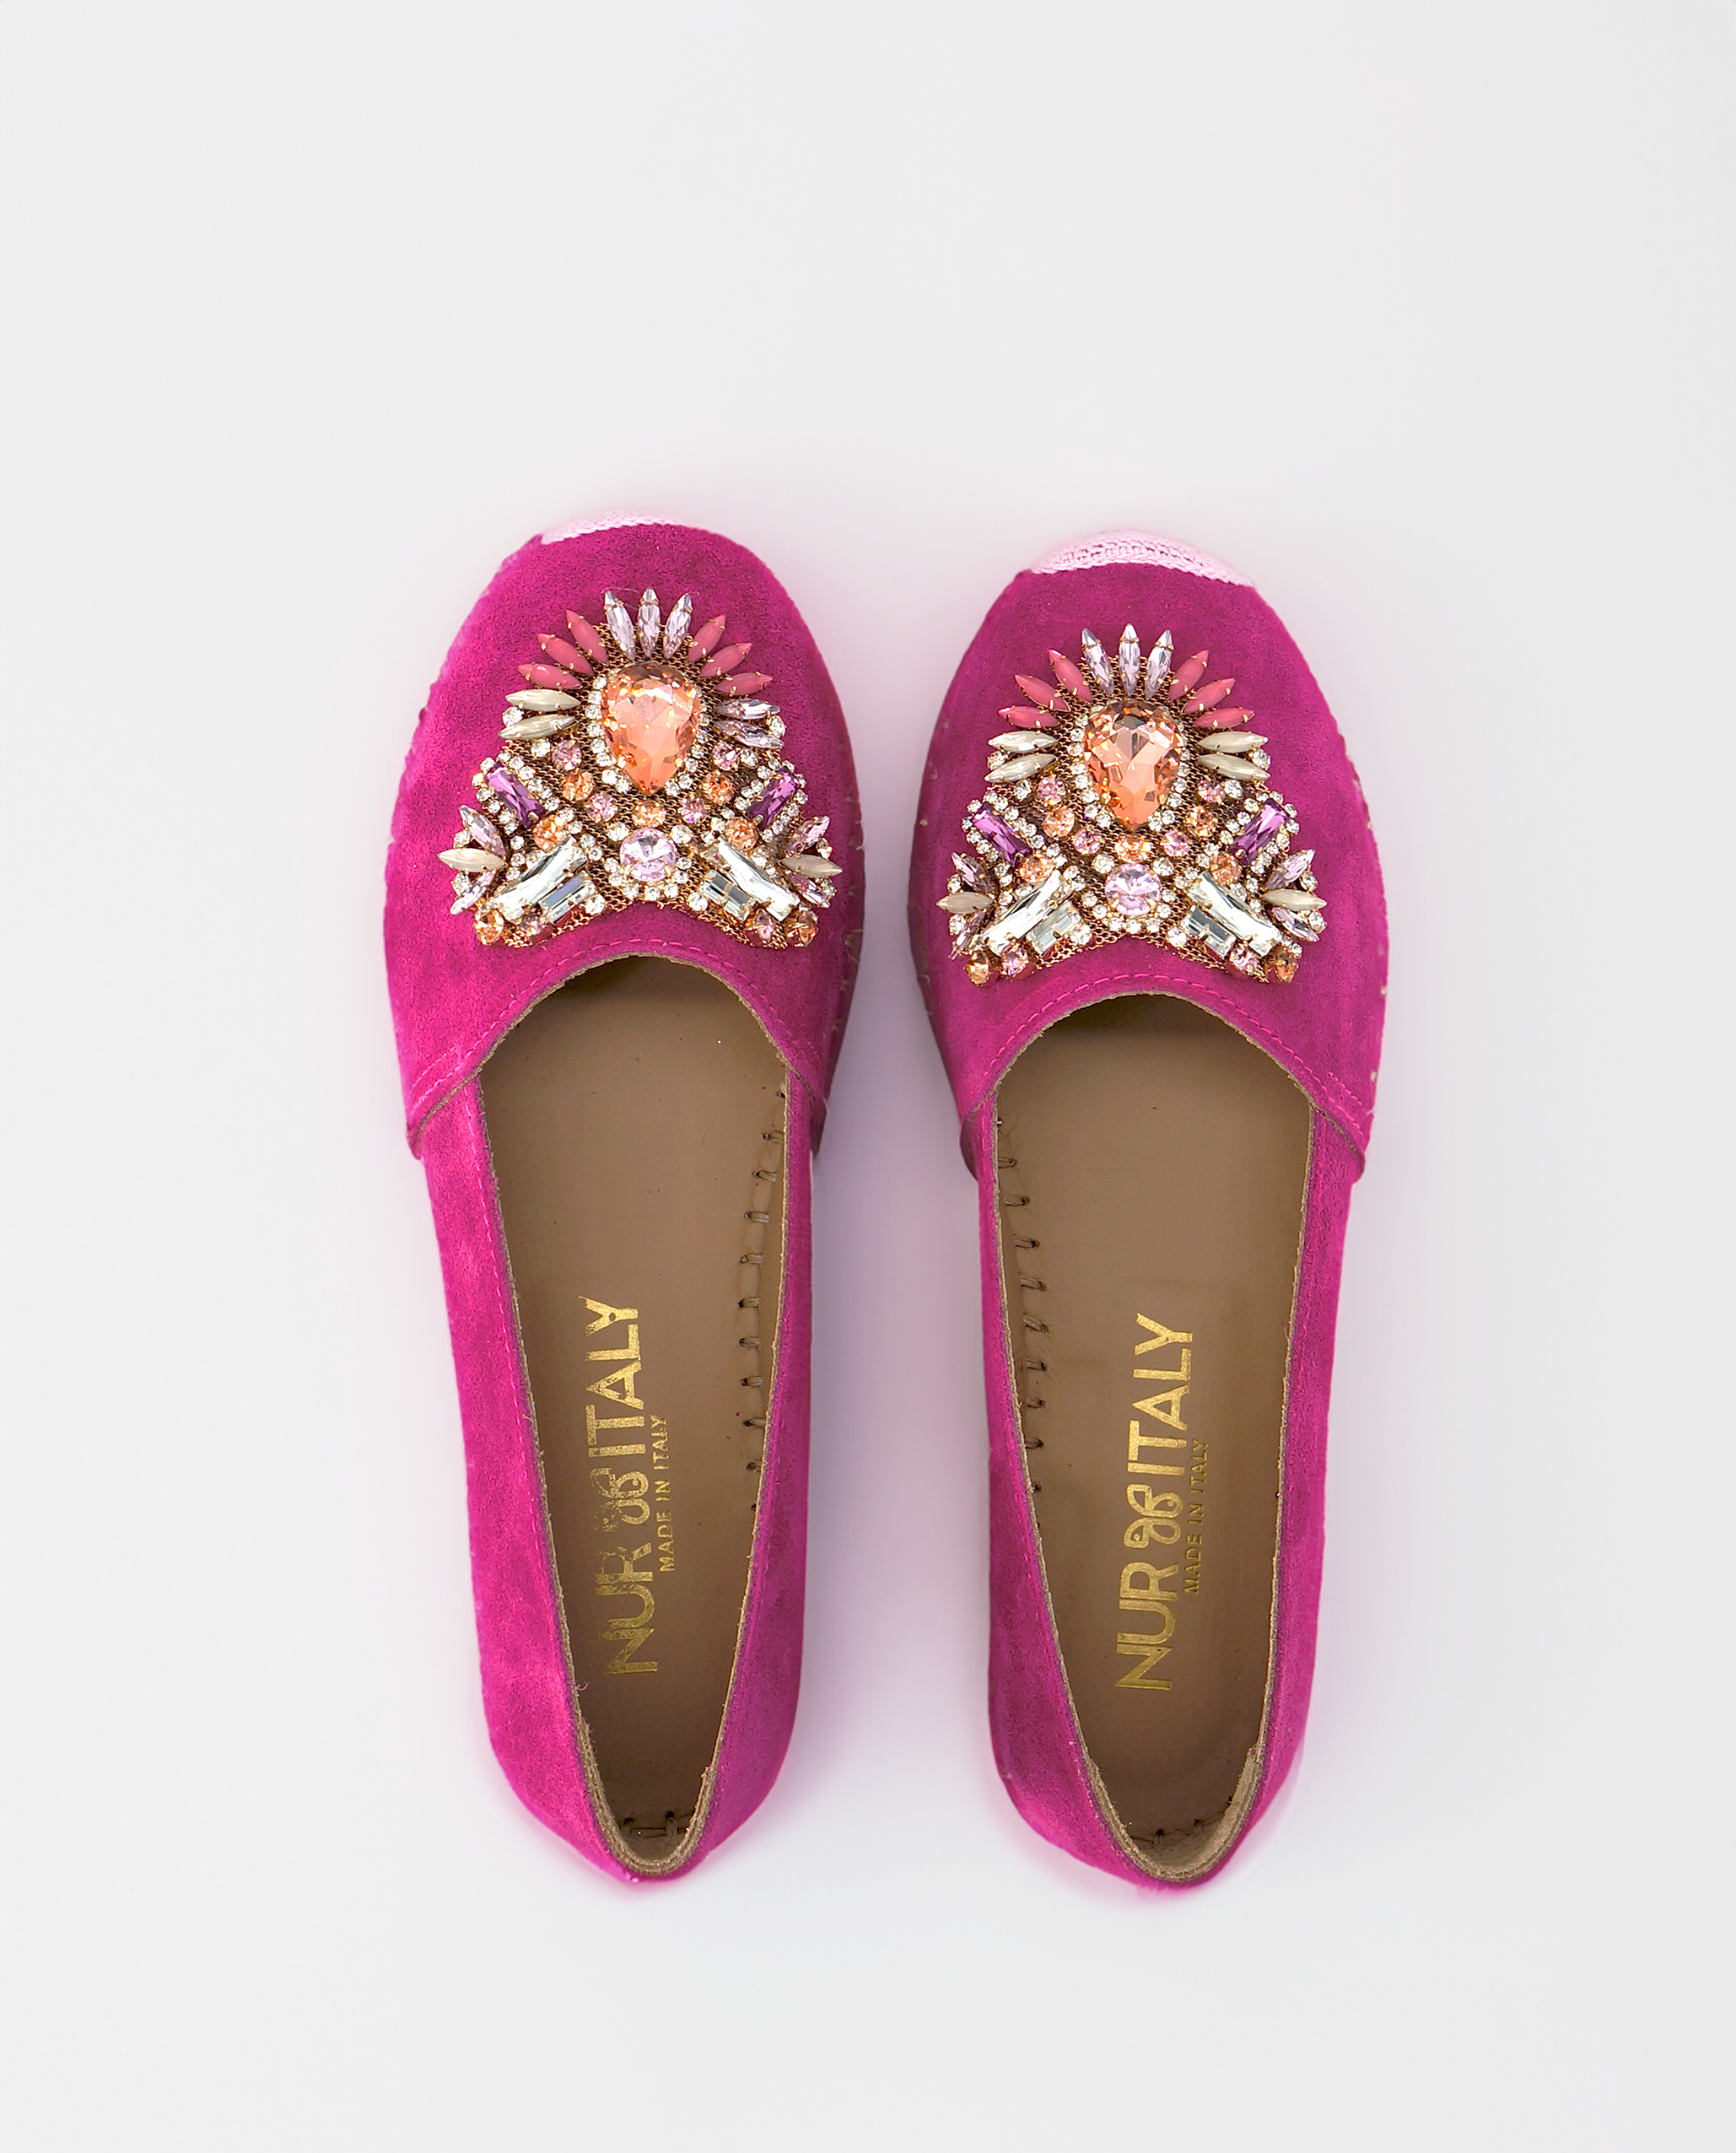 NUR ITALY Fiorella Suede Espadrilles with jewel accent on uppers, color, FUCHSIA